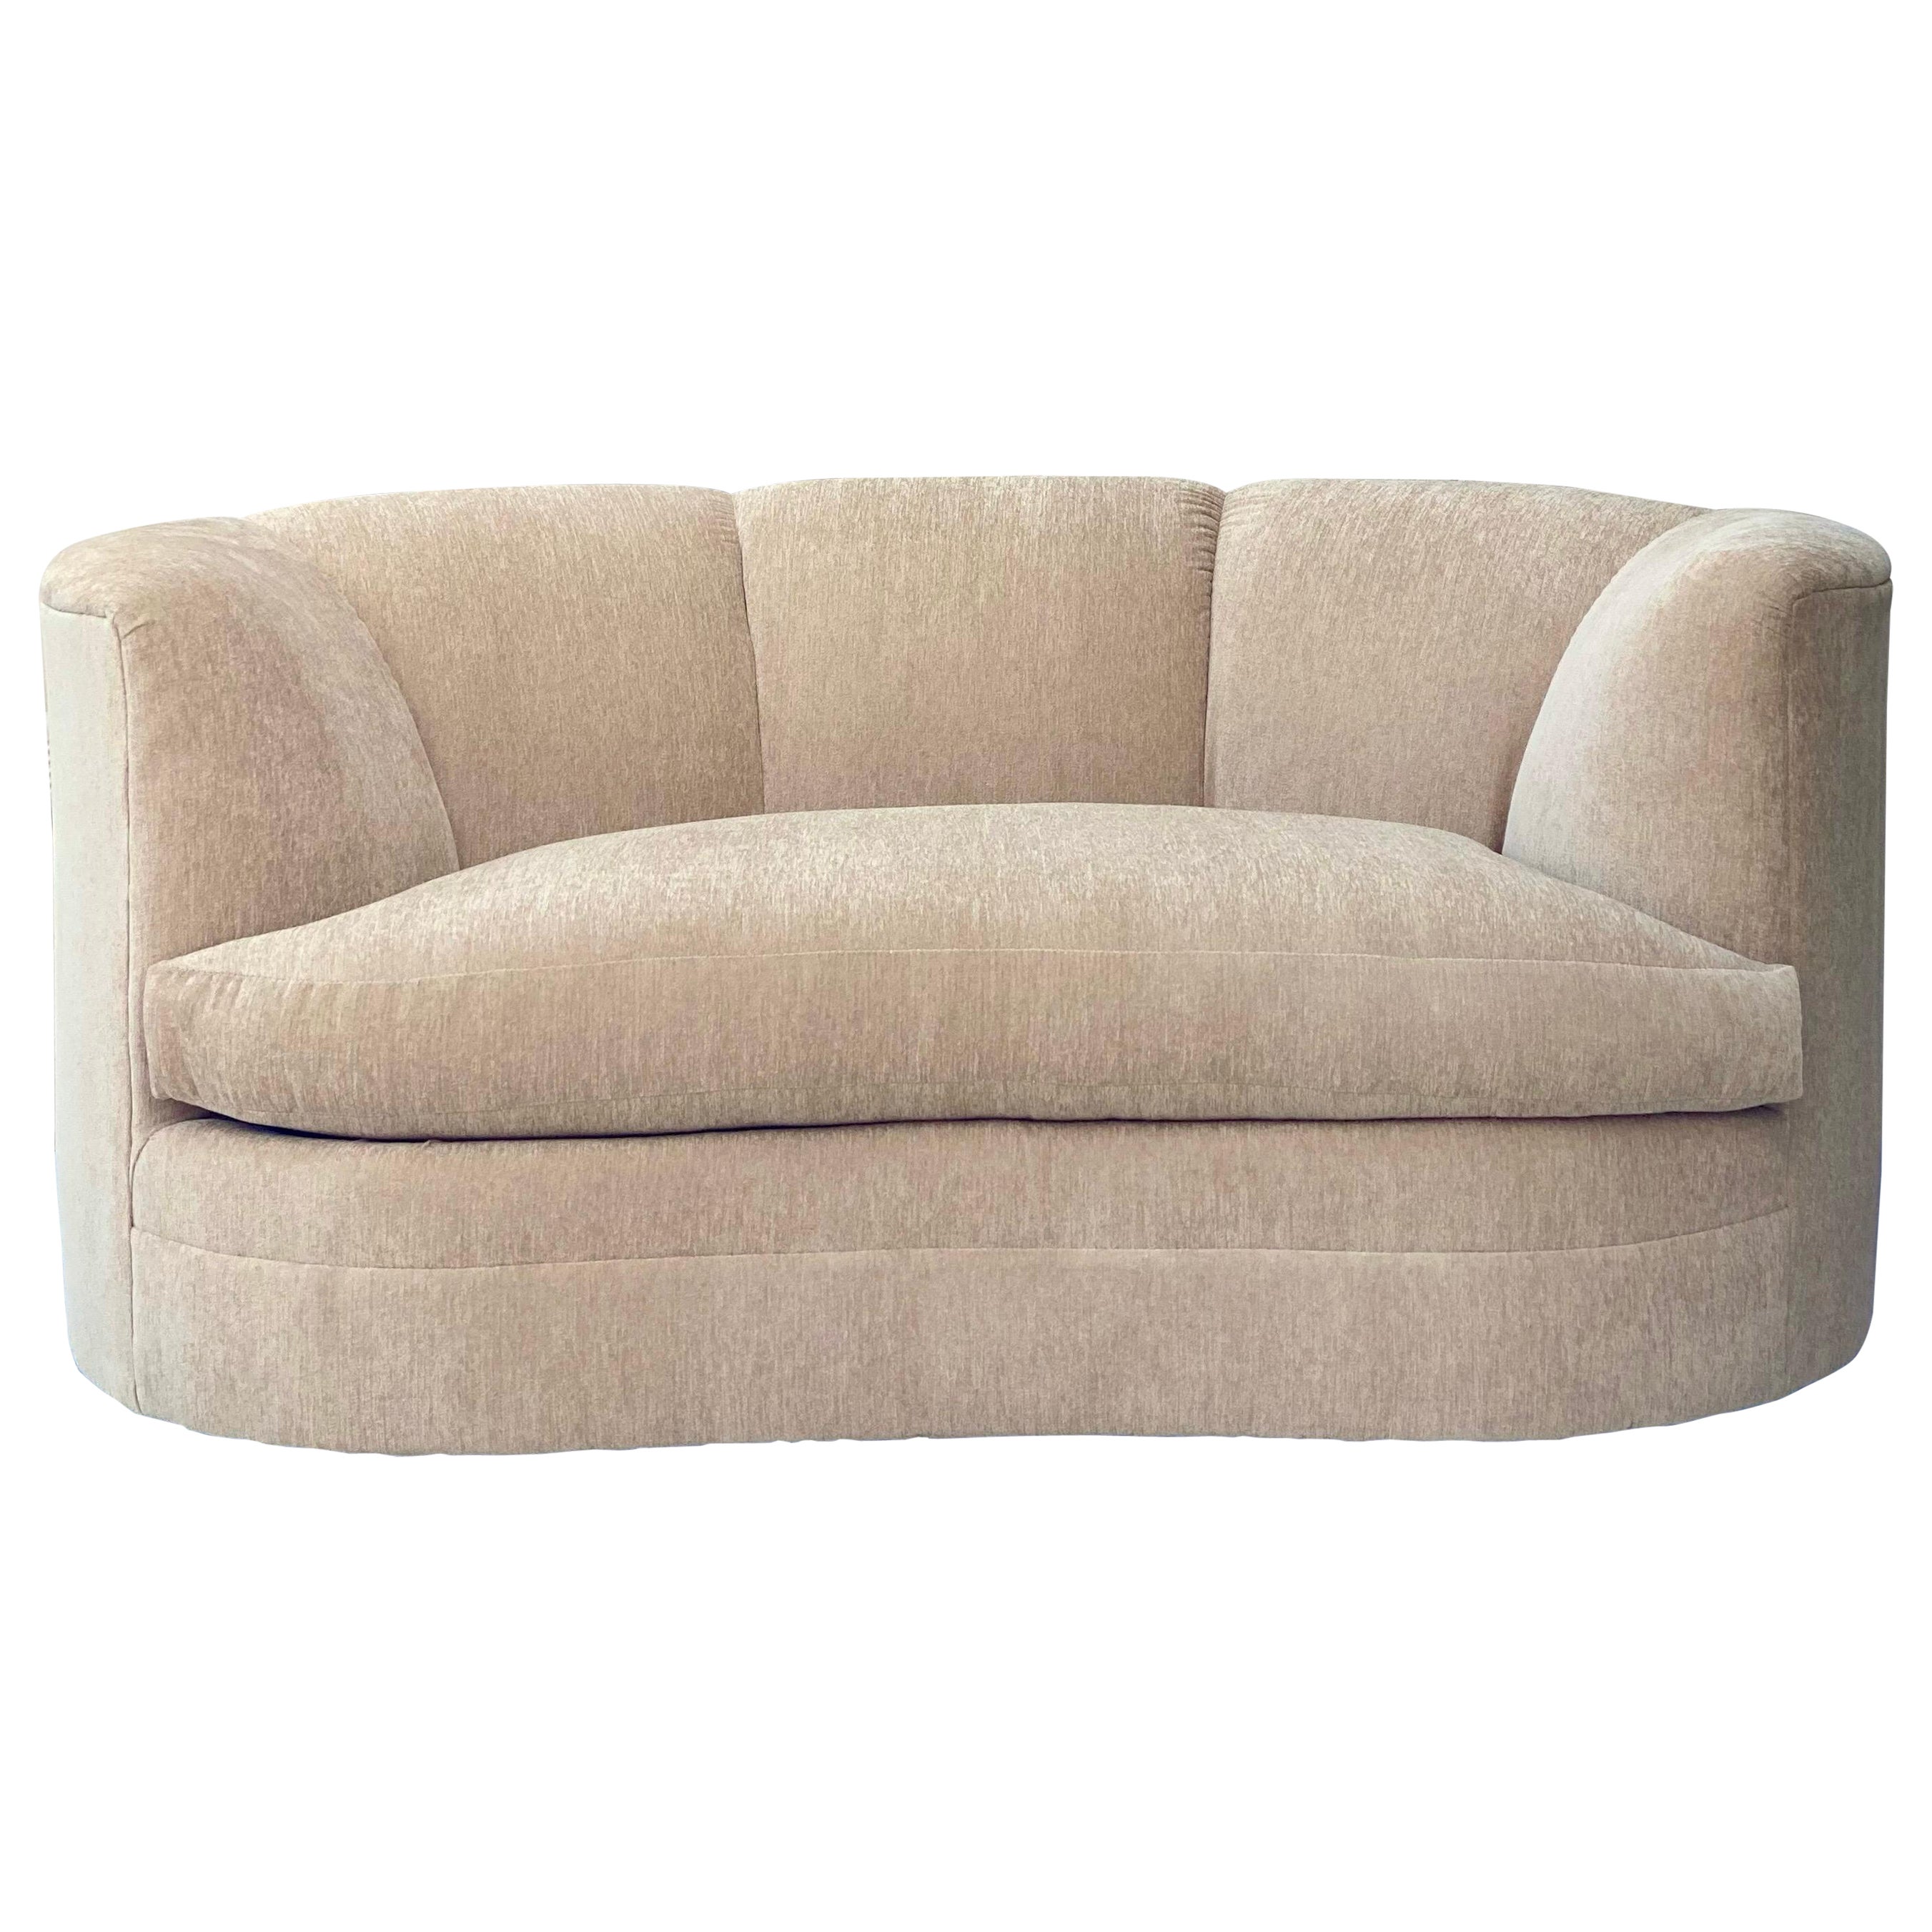 1980s Postmodern Reupholstered Taupe Curved Channel Sofa